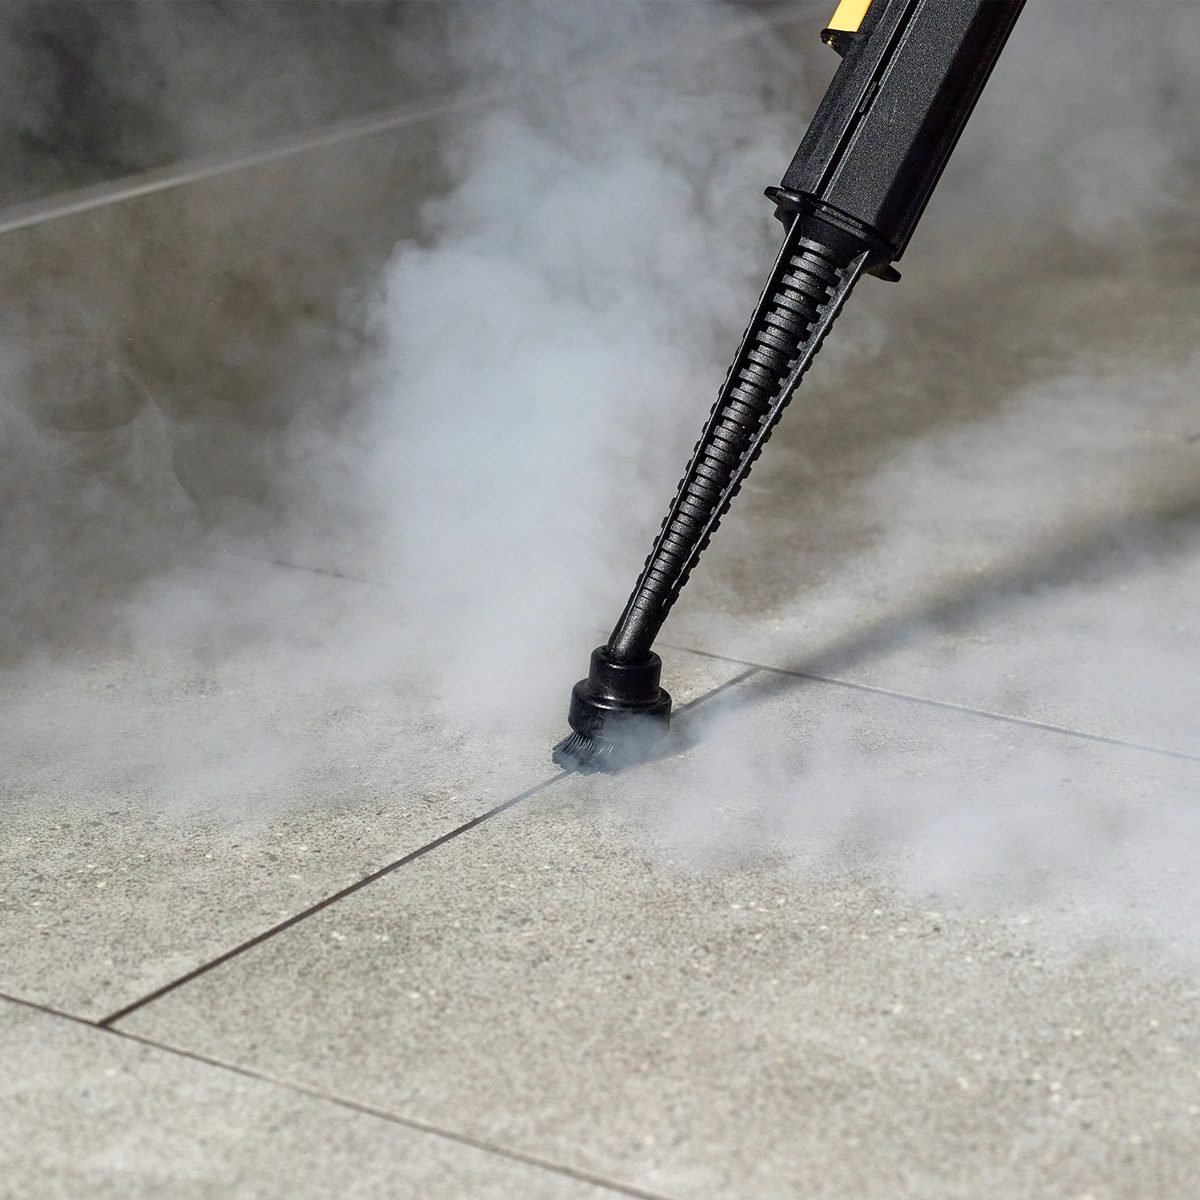 Freshen Up Your Basement and Floors—Shop Steam Cleaners As Low as $55